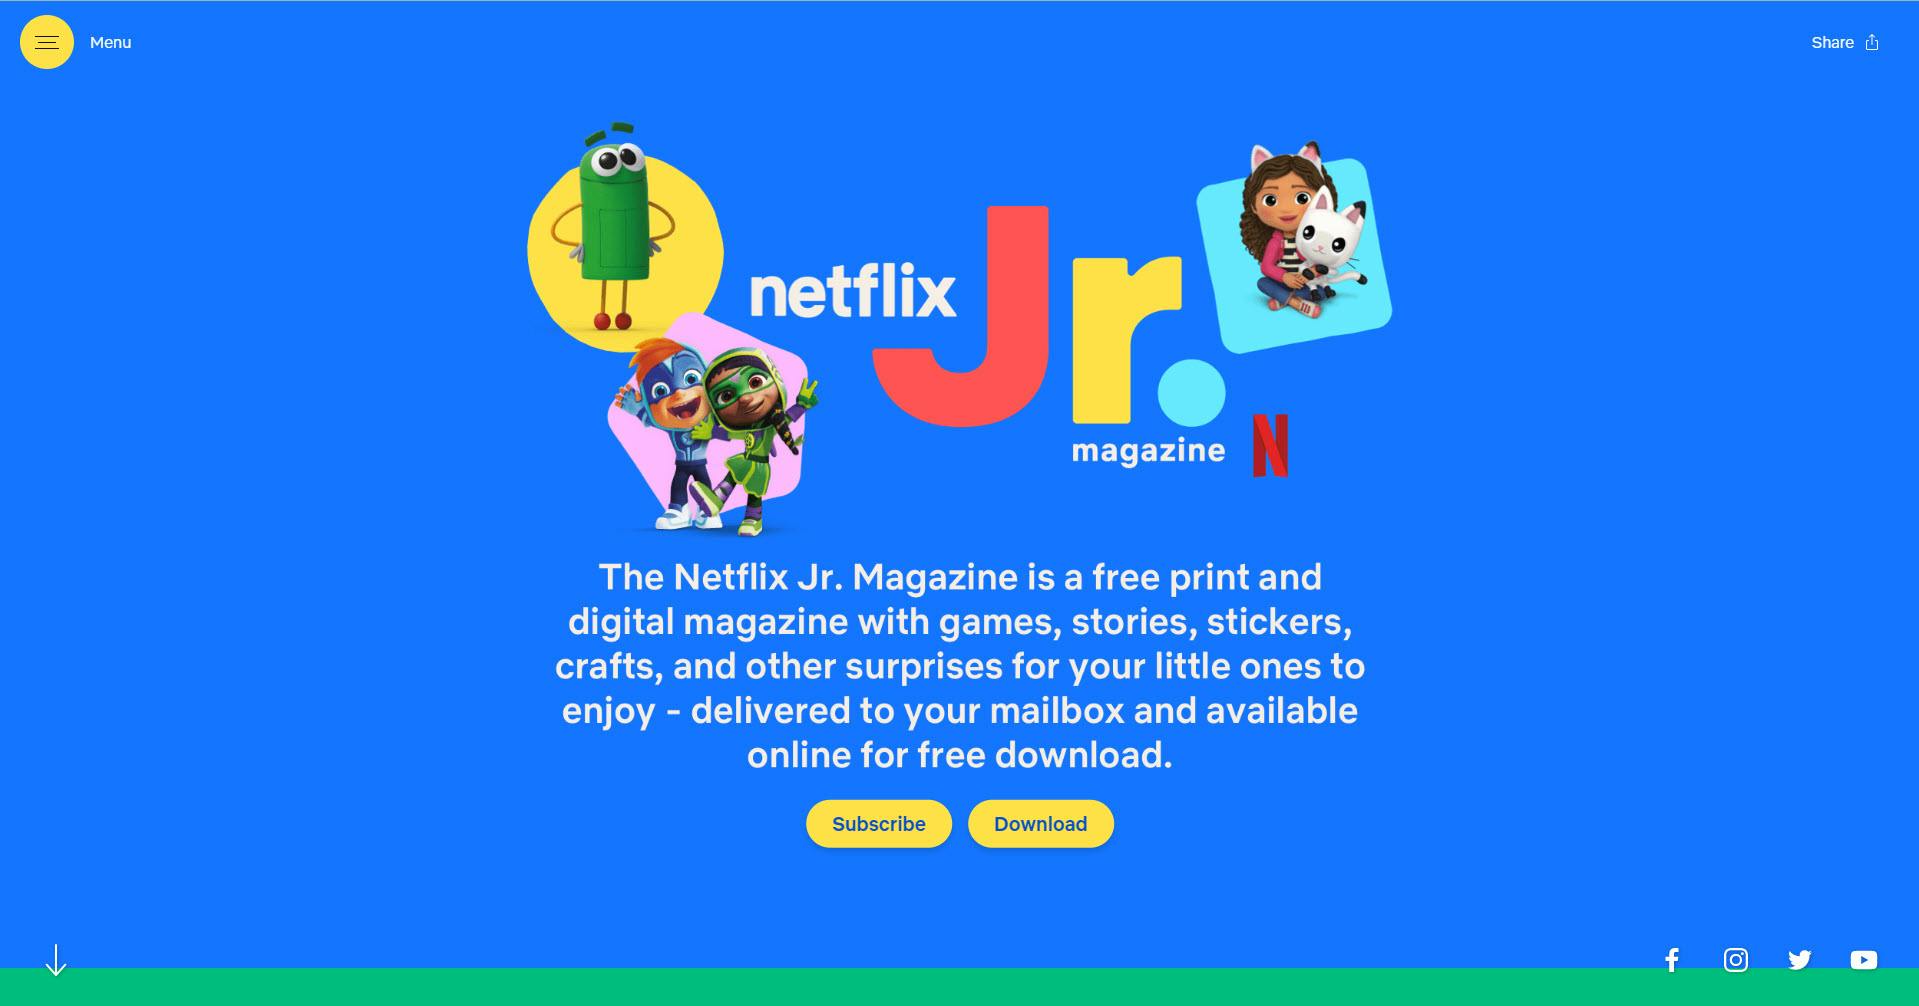 The Netflix Jr. magazine website with a girl holding a cat, two other children in costumes.